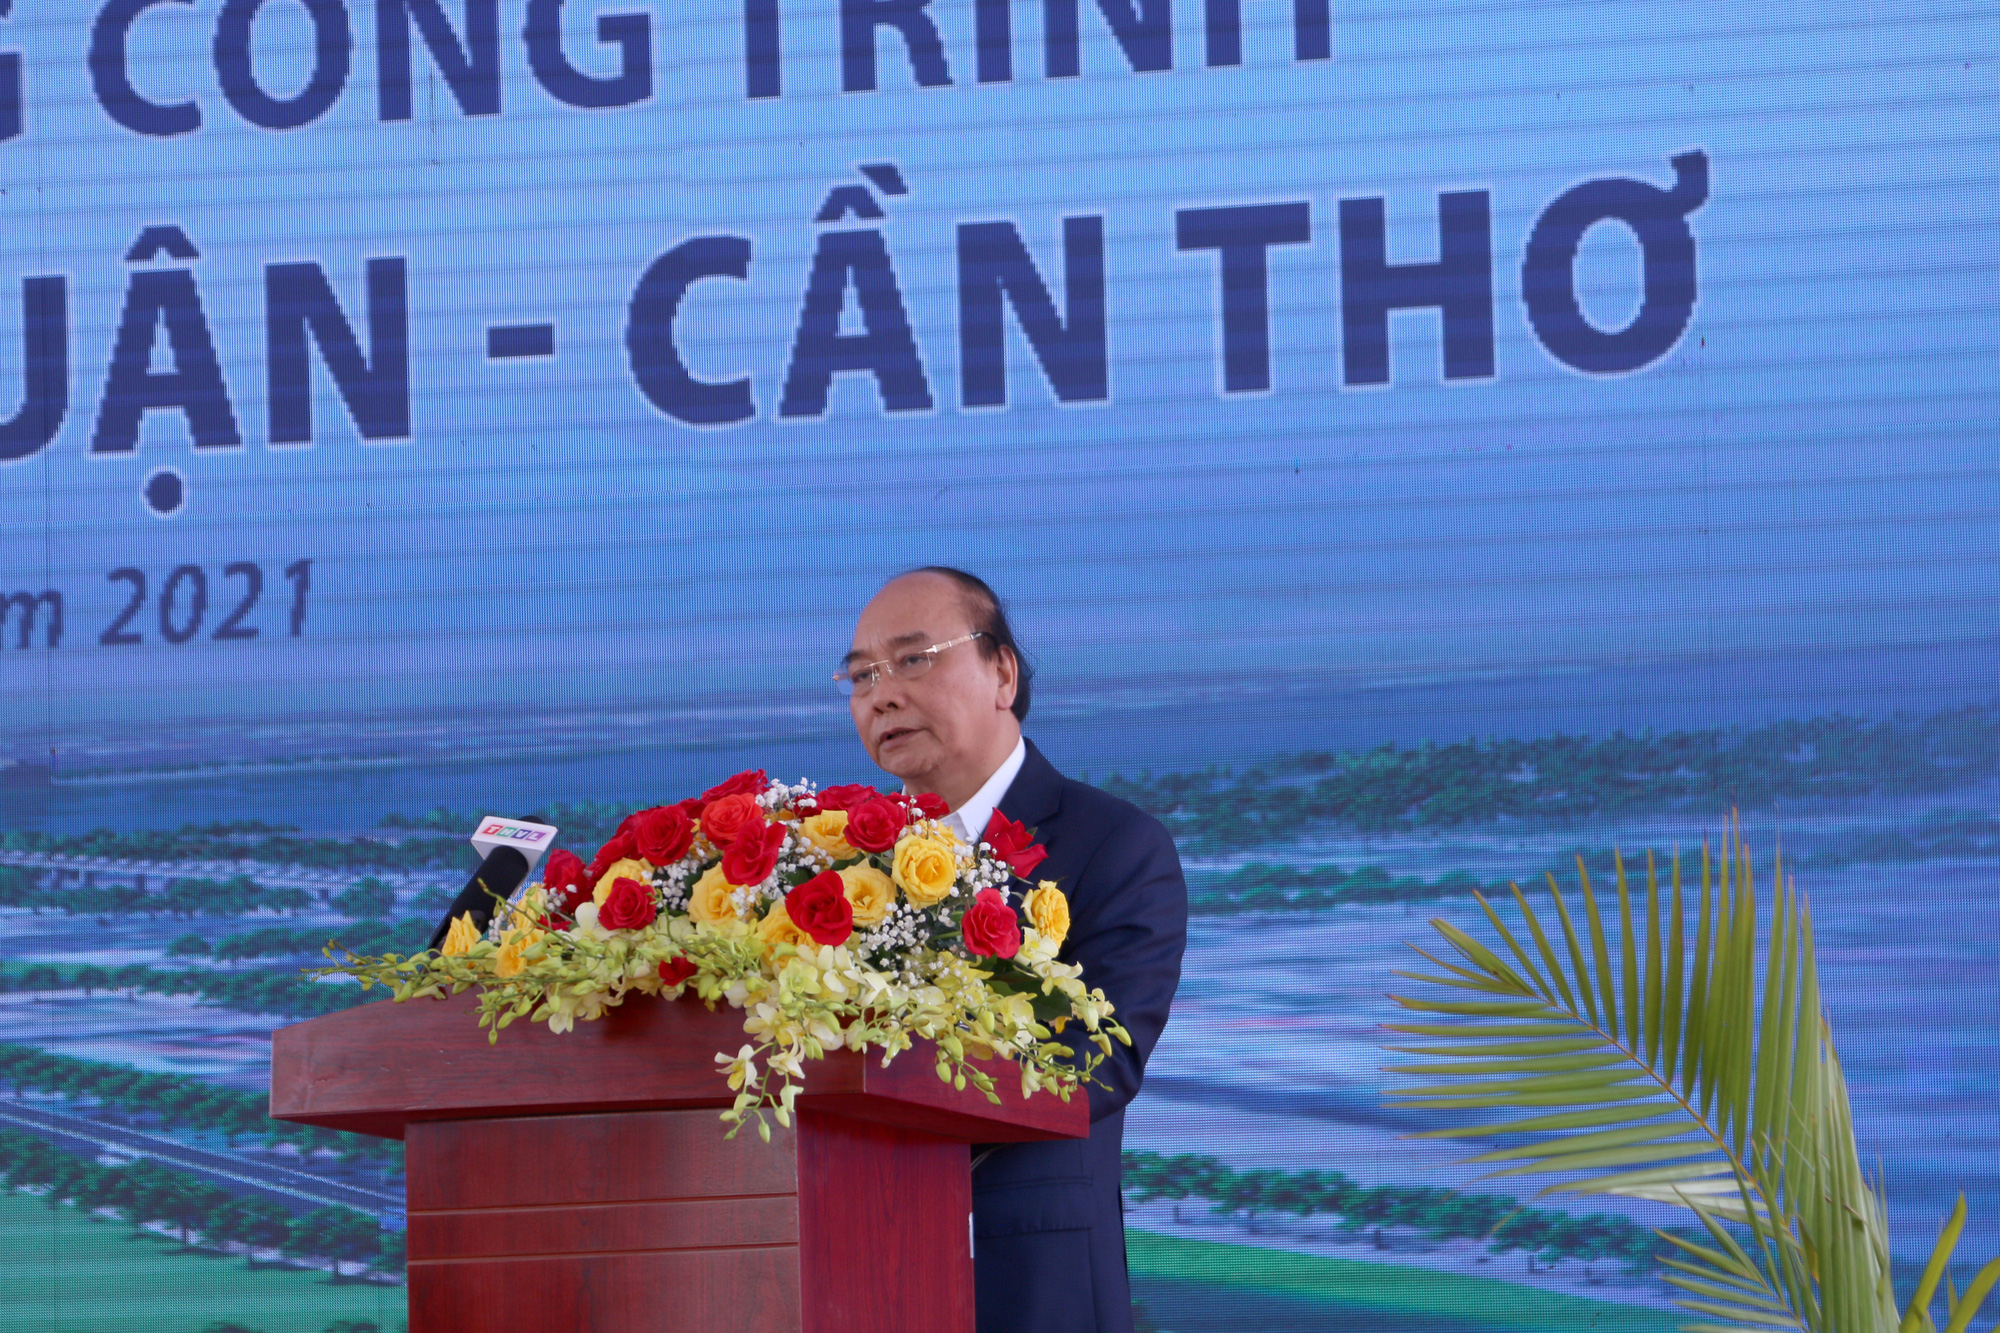 Prime Minister Nguyen Xuan Phuc speaks at the groundbreaking of My Thuan-Can Tho Expressway in Vinh Long Province, Vietnam on January 4, 2021. Photo: Chi Hanh / Tuoi Tre